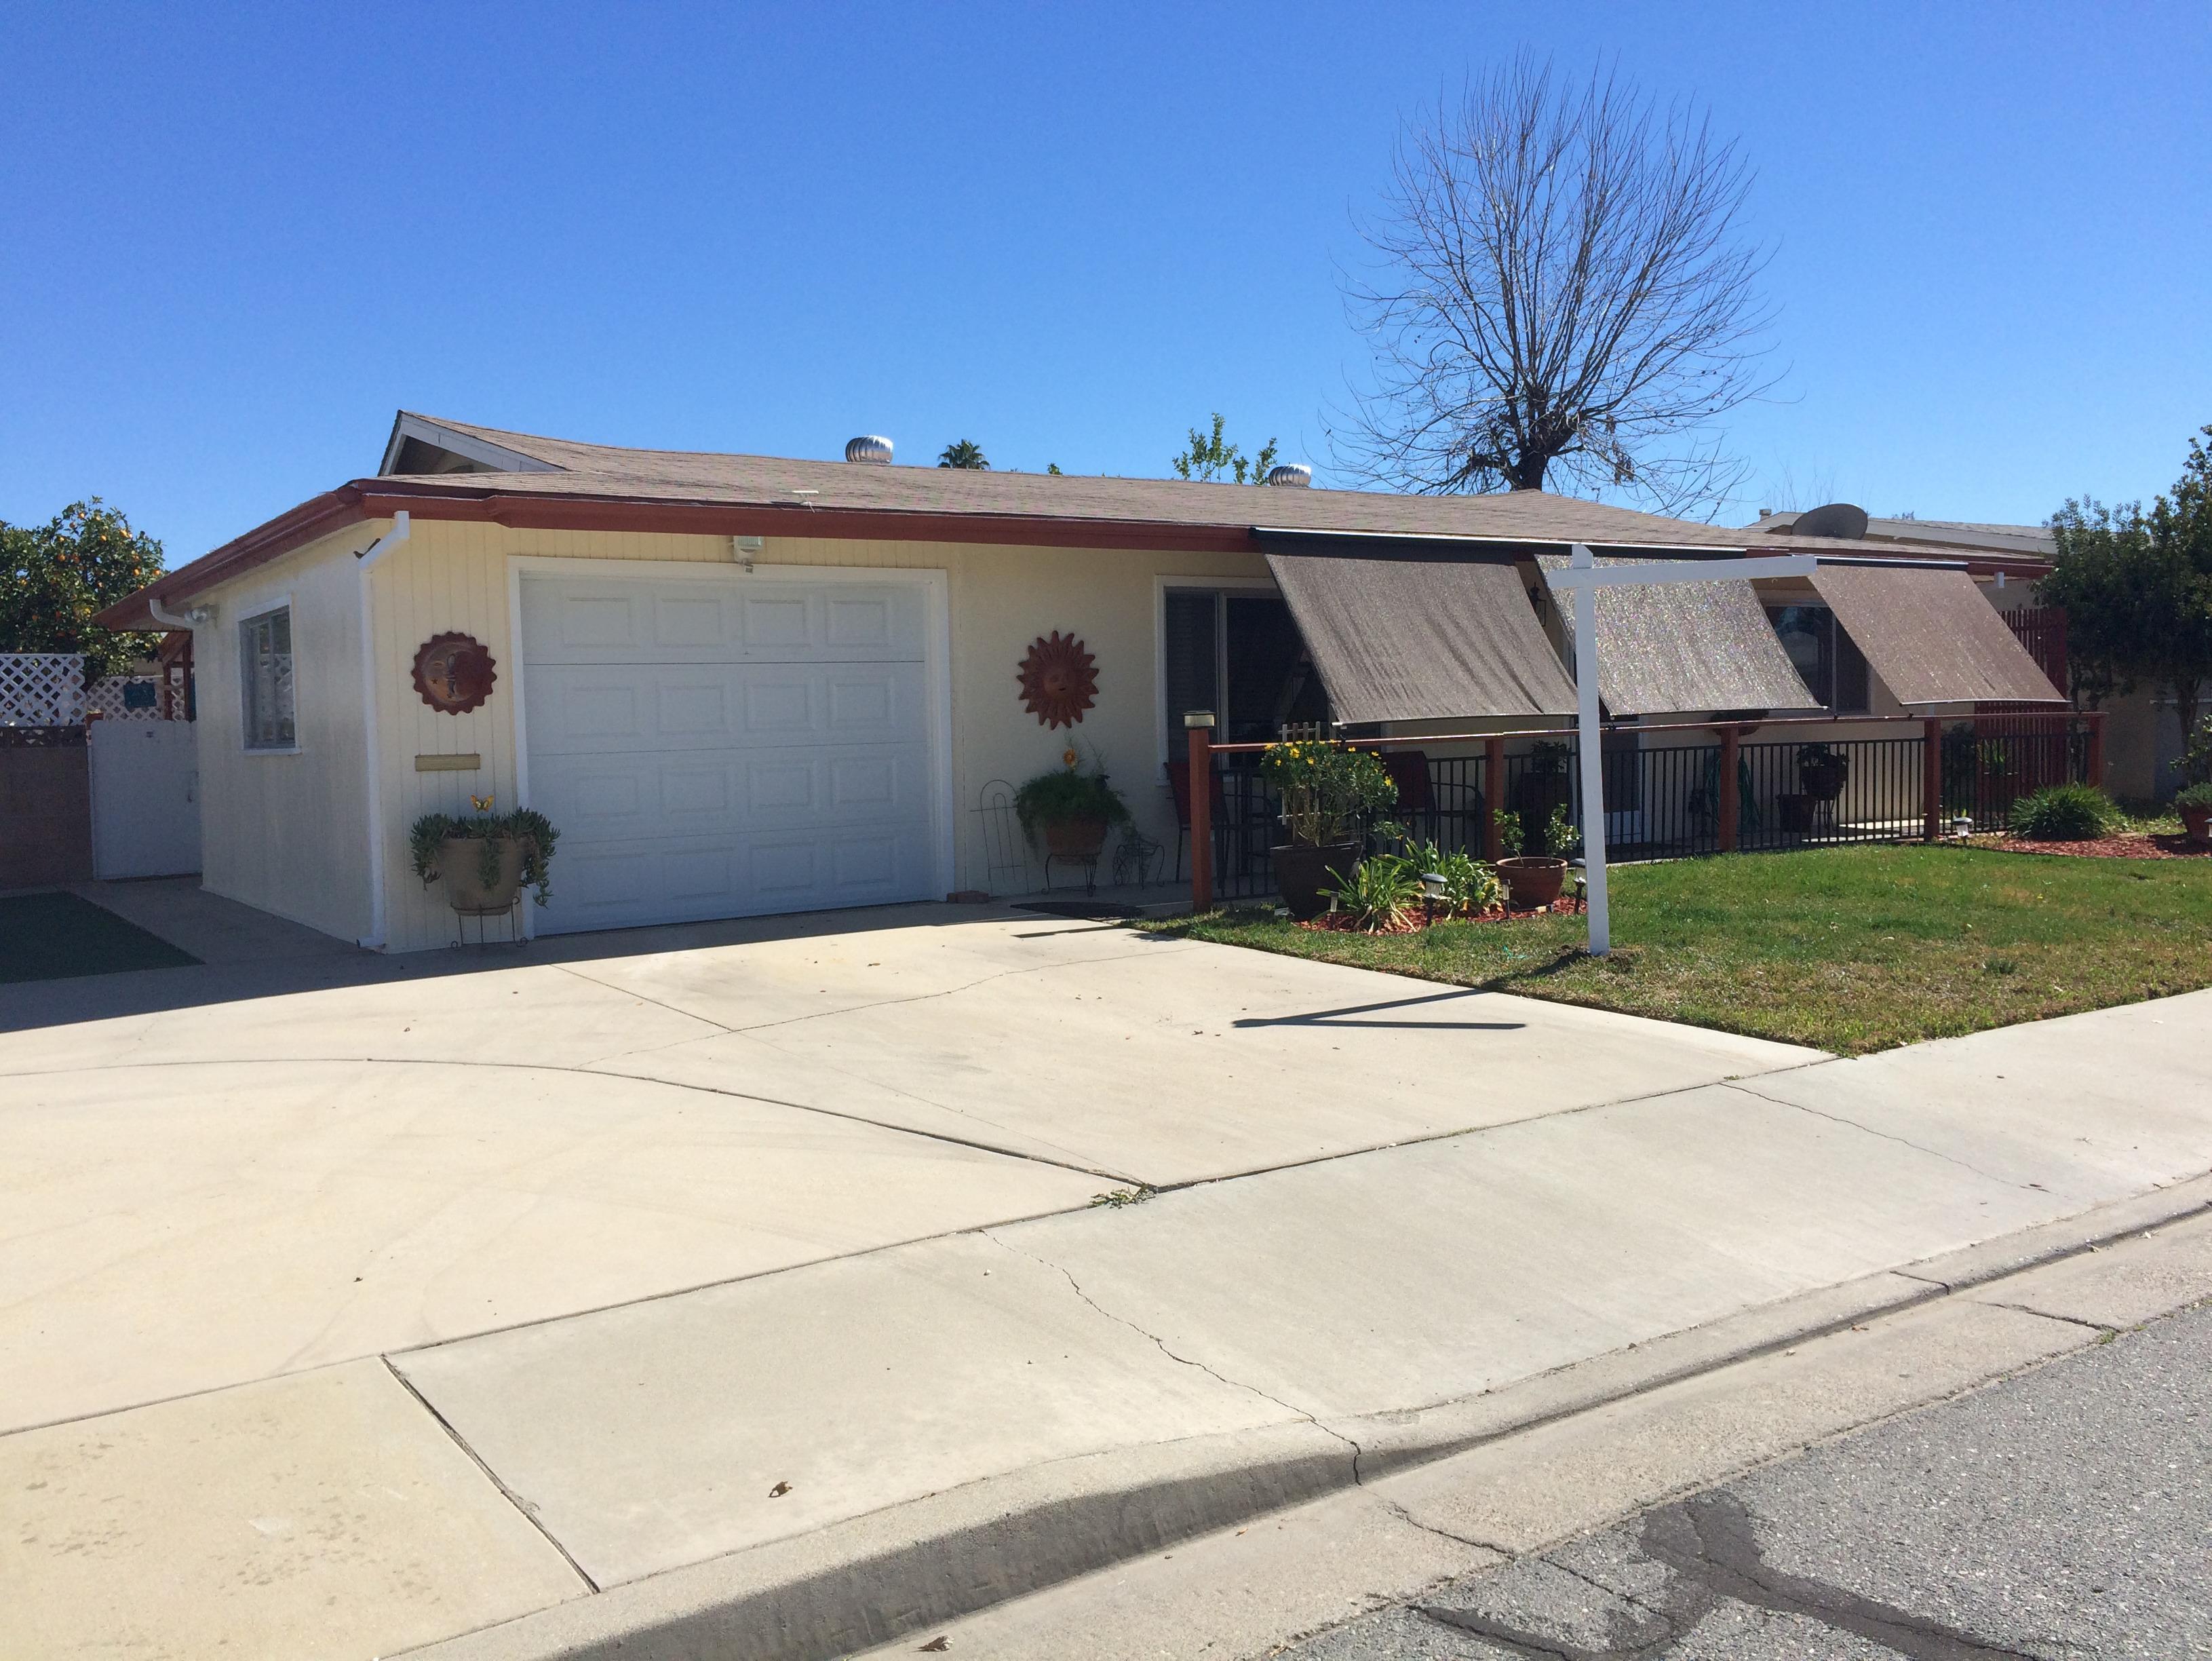 Sun Park II, Hemet CA.  SOLD in 15 days! Thinking of Buying or Selling contact Listing agent Denise Gentile at Coldwell Associated Brokers Realty 951-751-1311.